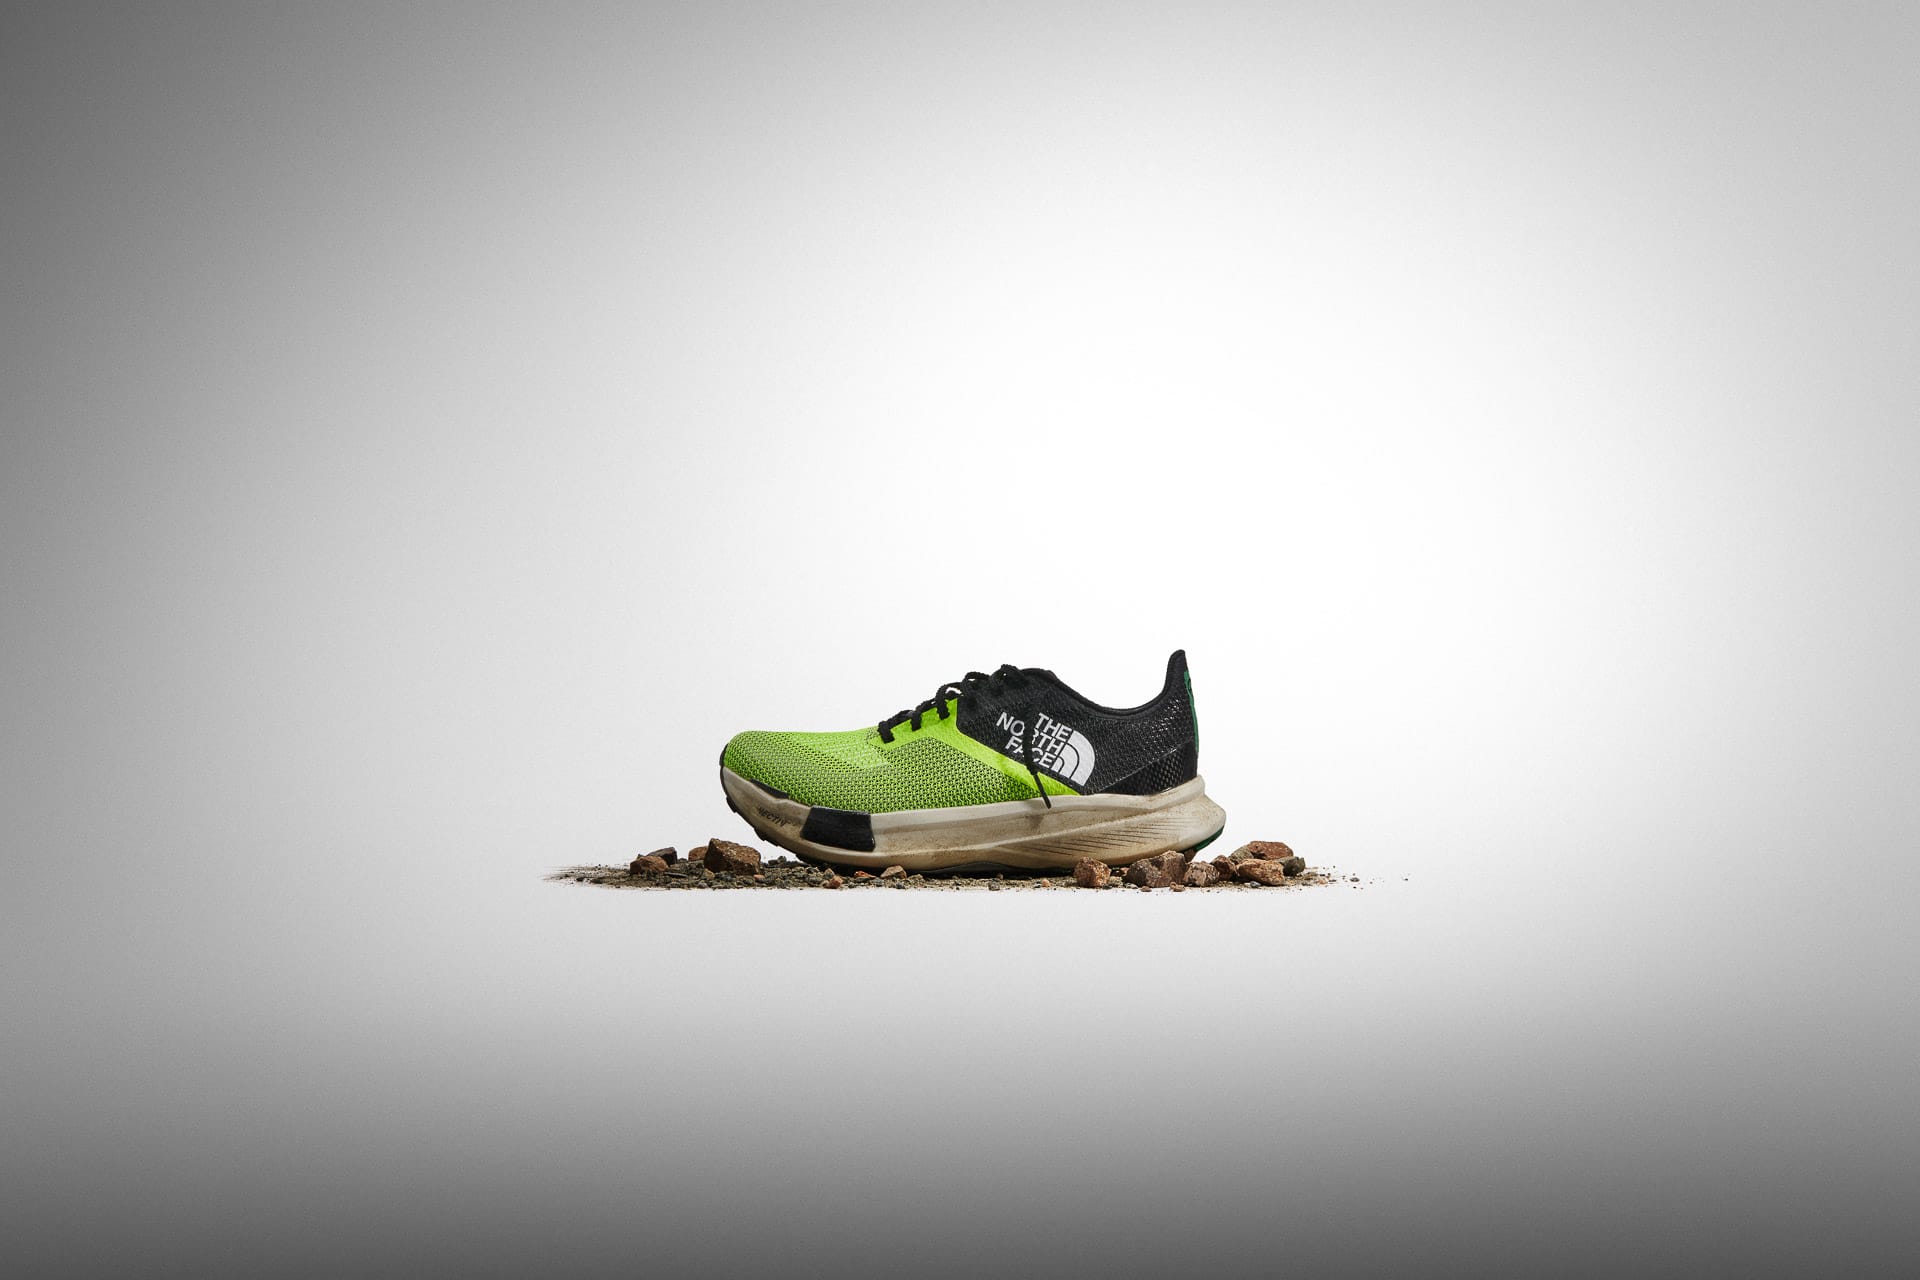 the north face vectiv 2 trail shoe, first look, running shots from The North Face, summit pro